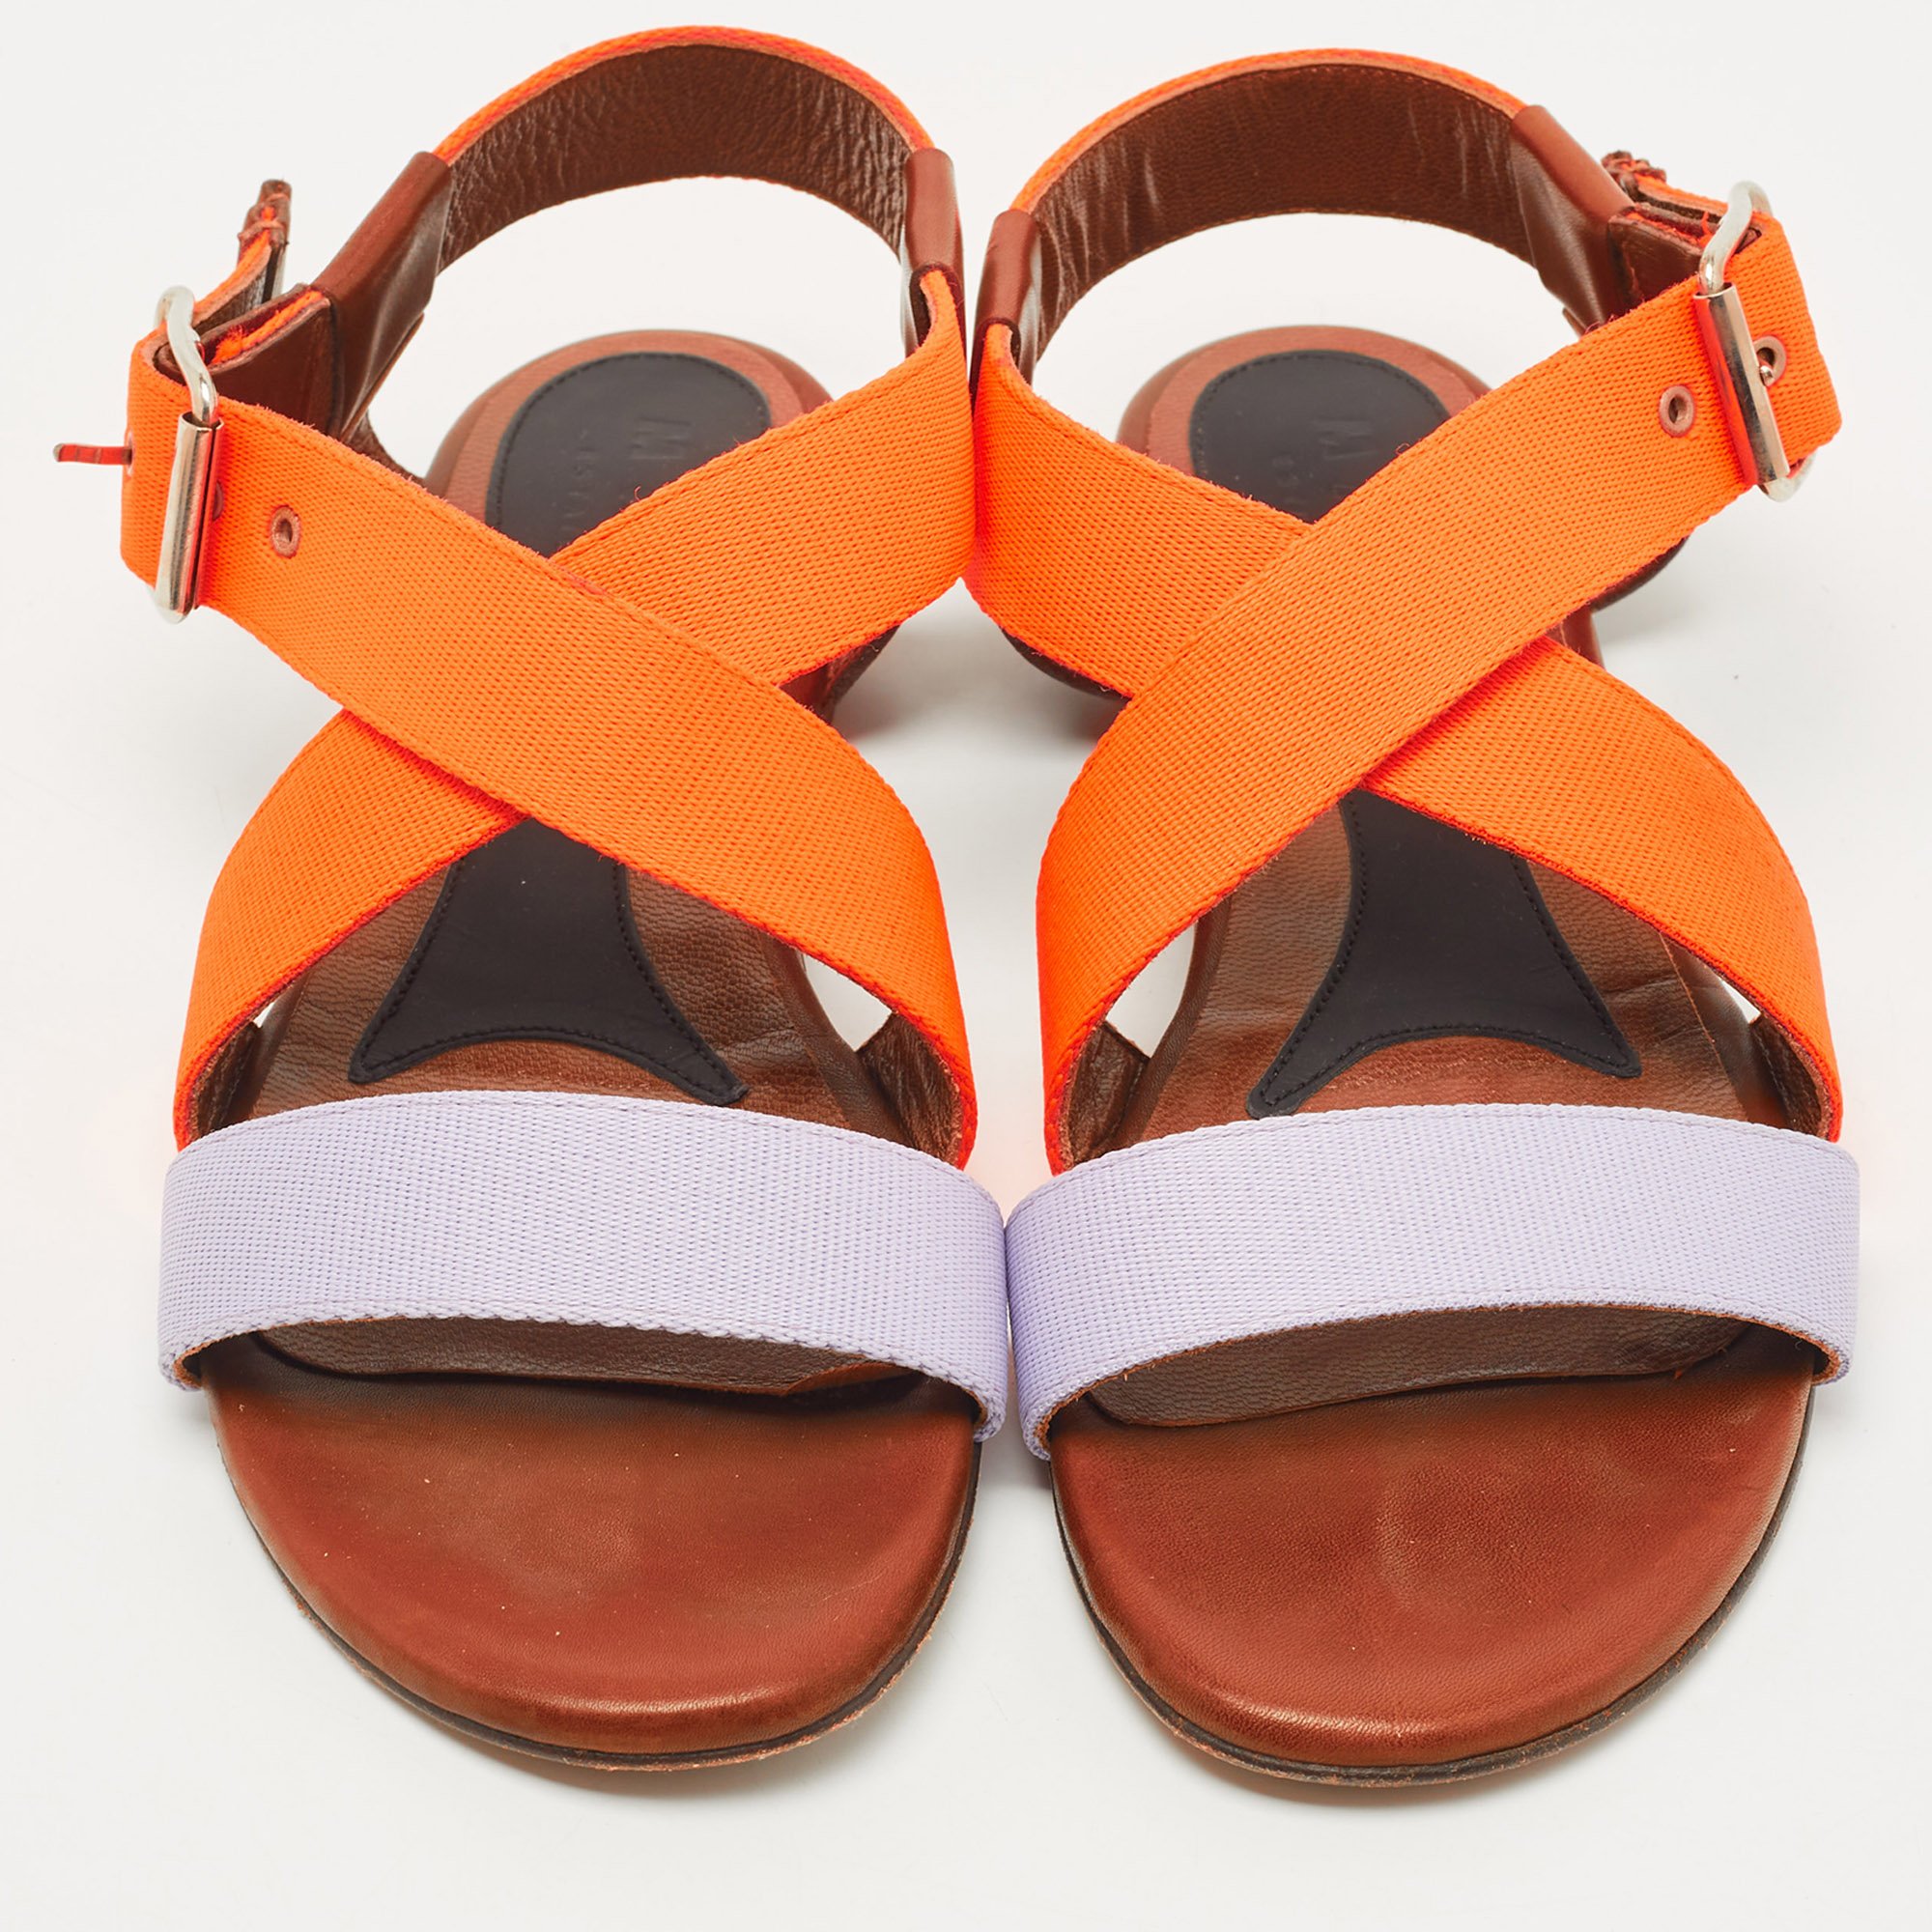 Marni Tricolor Canvas And Leather Flat Sandals Size 36.5